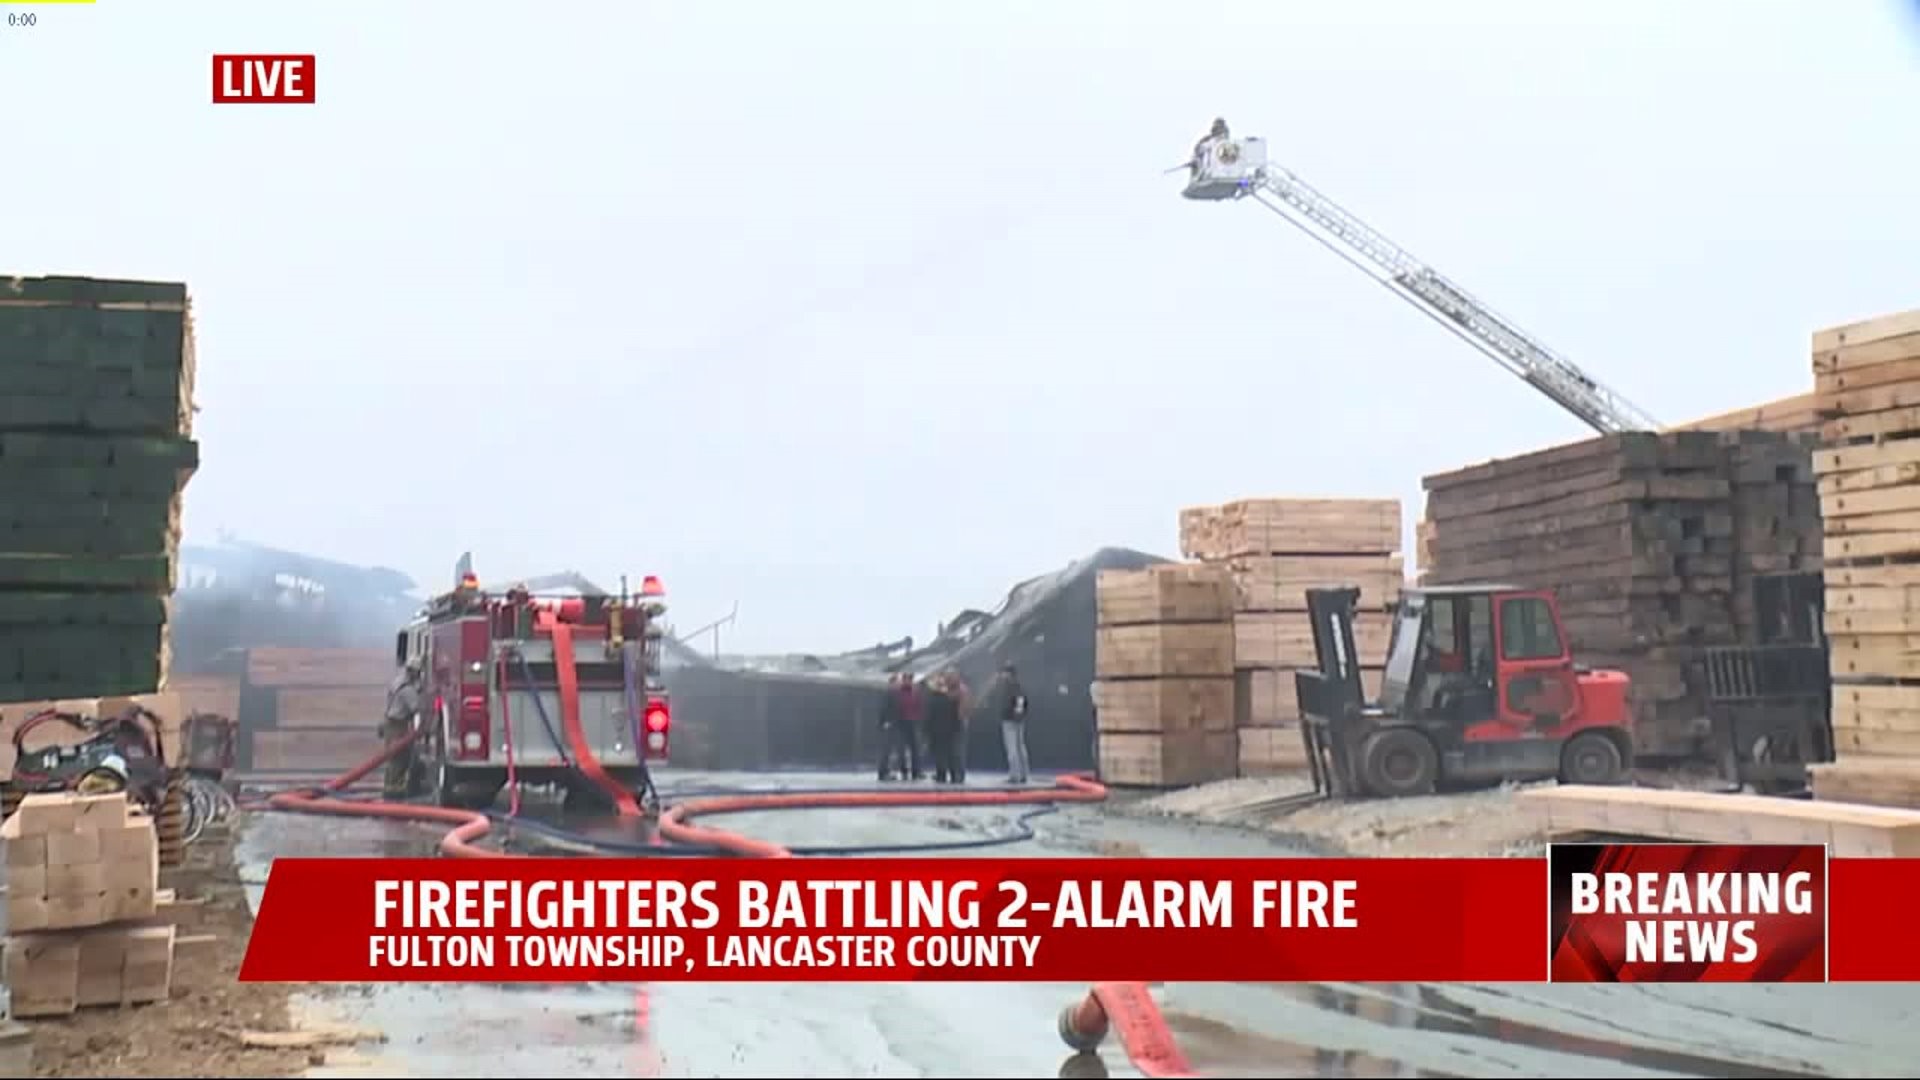 Firefighters Battling 2 Alarm Fire in Fulton Township, Lancaster County